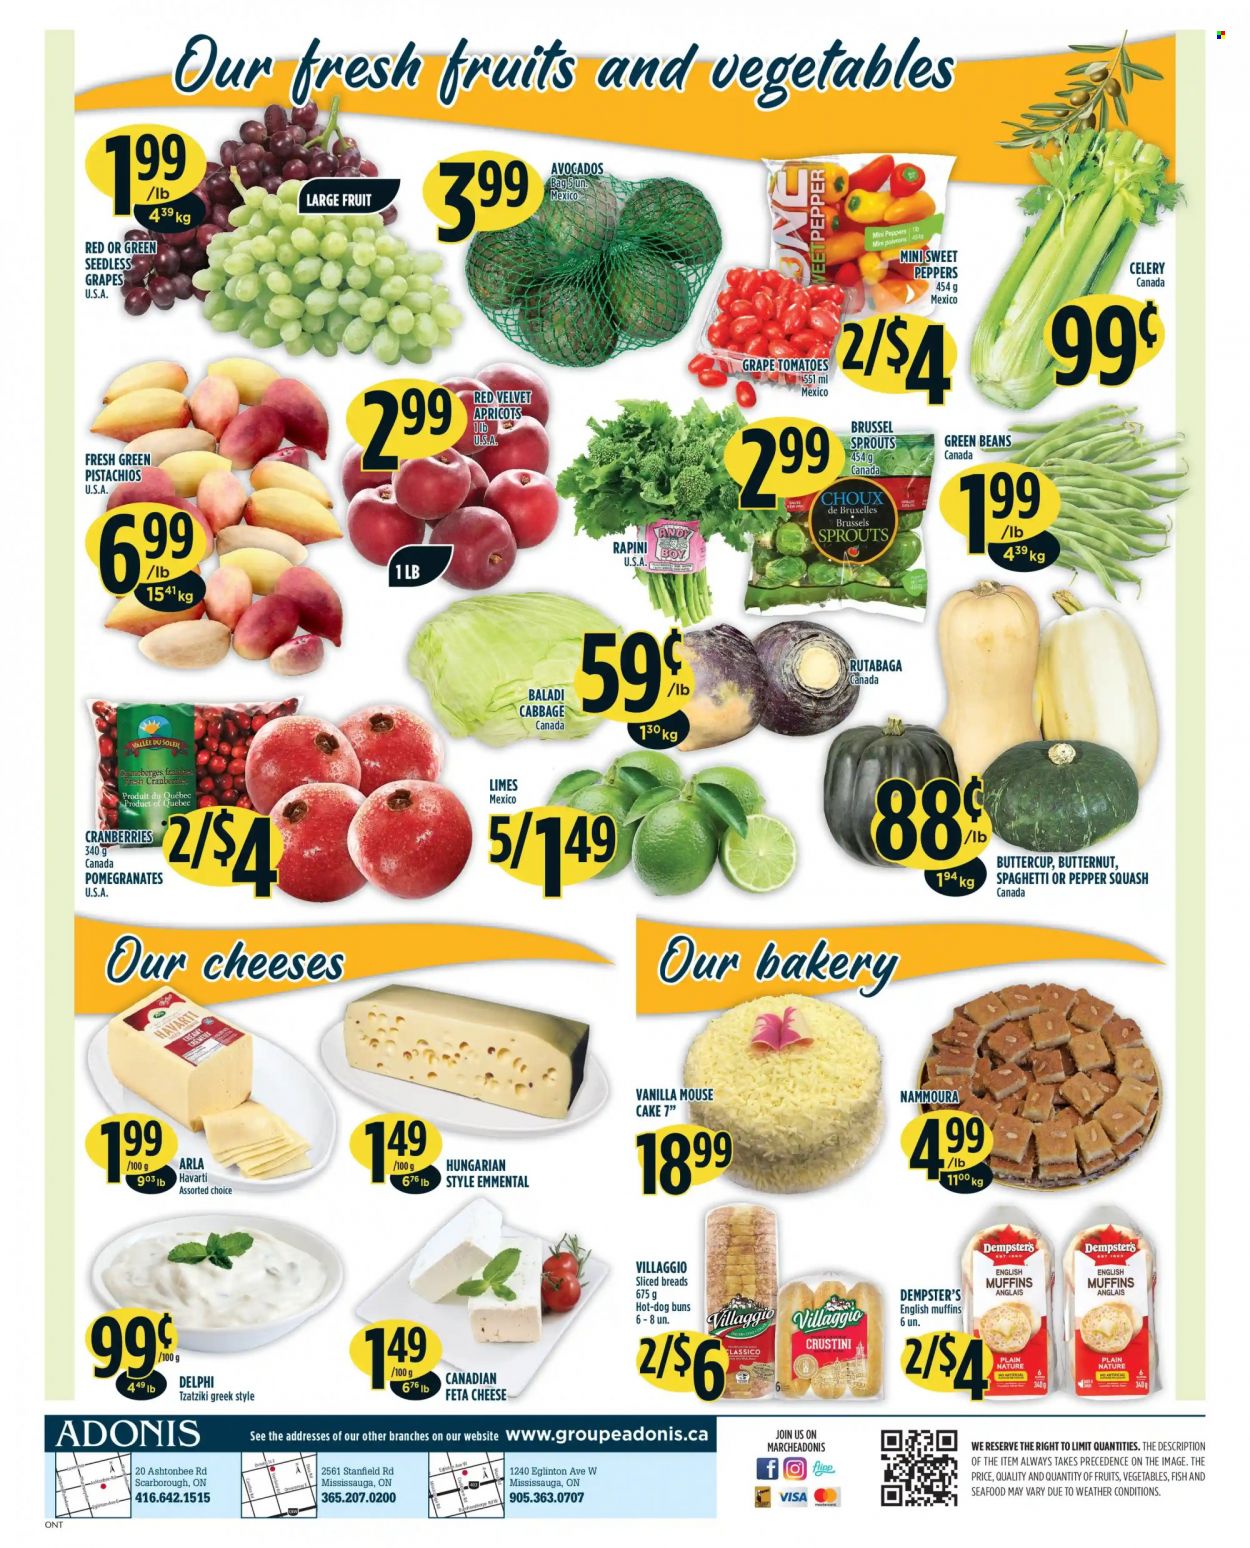 thumbnail - Adonis Flyer - September 23, 2021 - September 29, 2021 - Sales products - english muffins, cake, buns, beans, butternut squash, cabbage, celery, green beans, sweet peppers, tomatoes, peppers, brussel sprouts, avocado, limes, seedless grapes, apricots, pomegranate, seafood, spaghetti, tzatziki, Havarti, cheese, feta, Arla, cranberries, Classico, pistachios, mouse, rutabaga. Page 4.